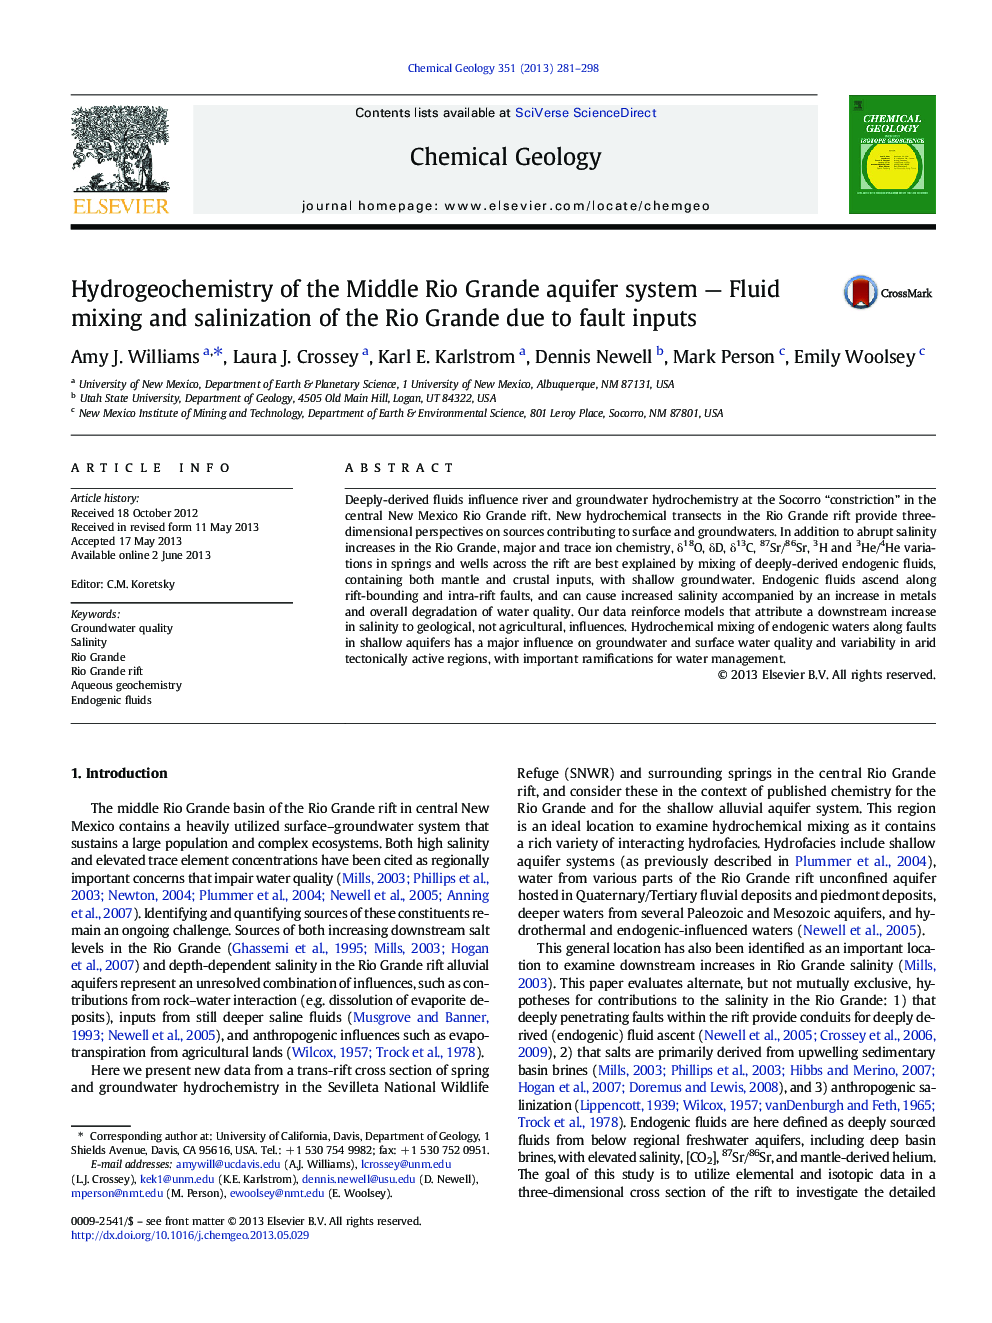 Hydrogeochemistry of the Middle Rio Grande aquifer system - Fluid mixing and salinization of the Rio Grande due to fault inputs